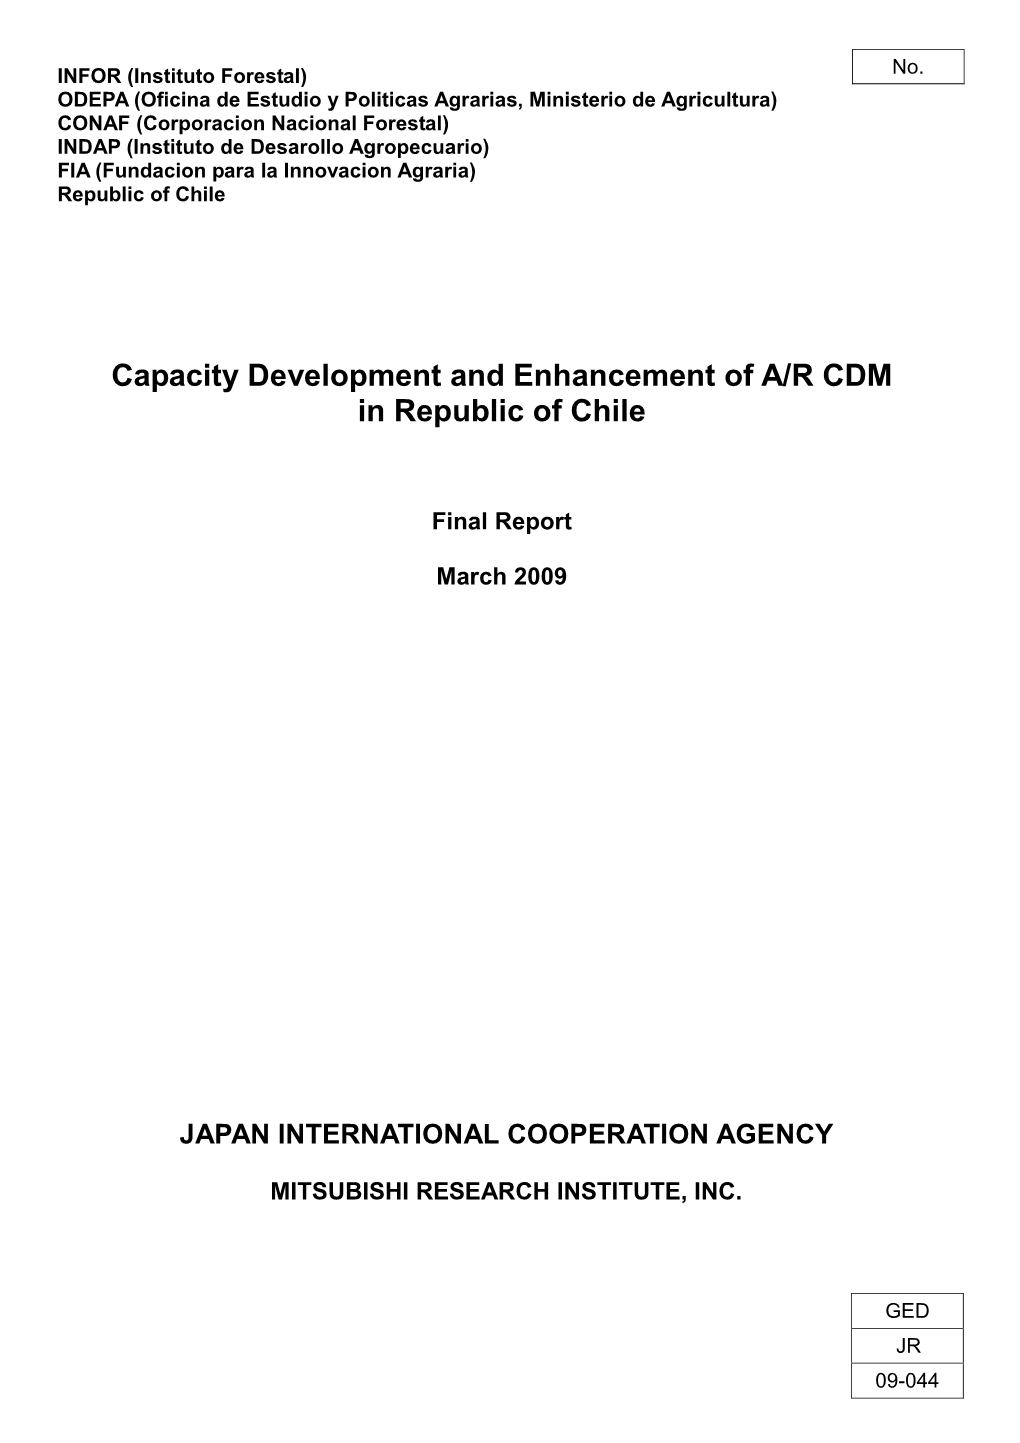 Capacity Development and Enhancement of A/R CDM in Republic of Chile